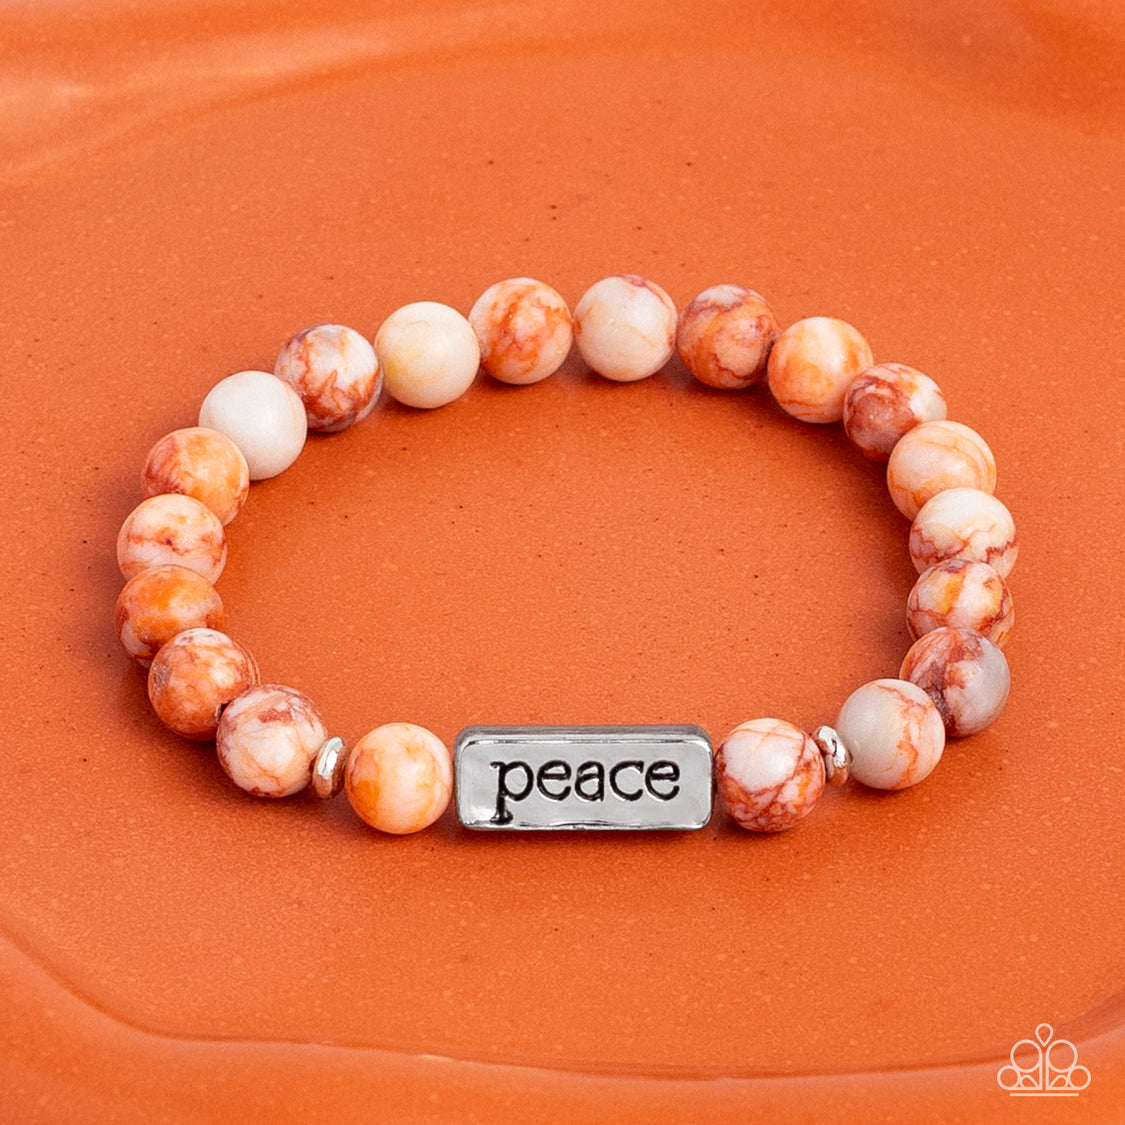 Serene Season Orange Stretch Bracelet - Paparazzi Accessories  Meeting at the center of an elastic stretch bracelet, a silver, rectangular bar, hammered in a light sheen, is stamped with the word "peace" for a serene statement. Marbled, orange stone beads, and silver accents encircle the silver bar creating a calming, cheerful finish. As the stone elements in this piece are natural, some color variation is normal.  Sold as one individual bracelet.